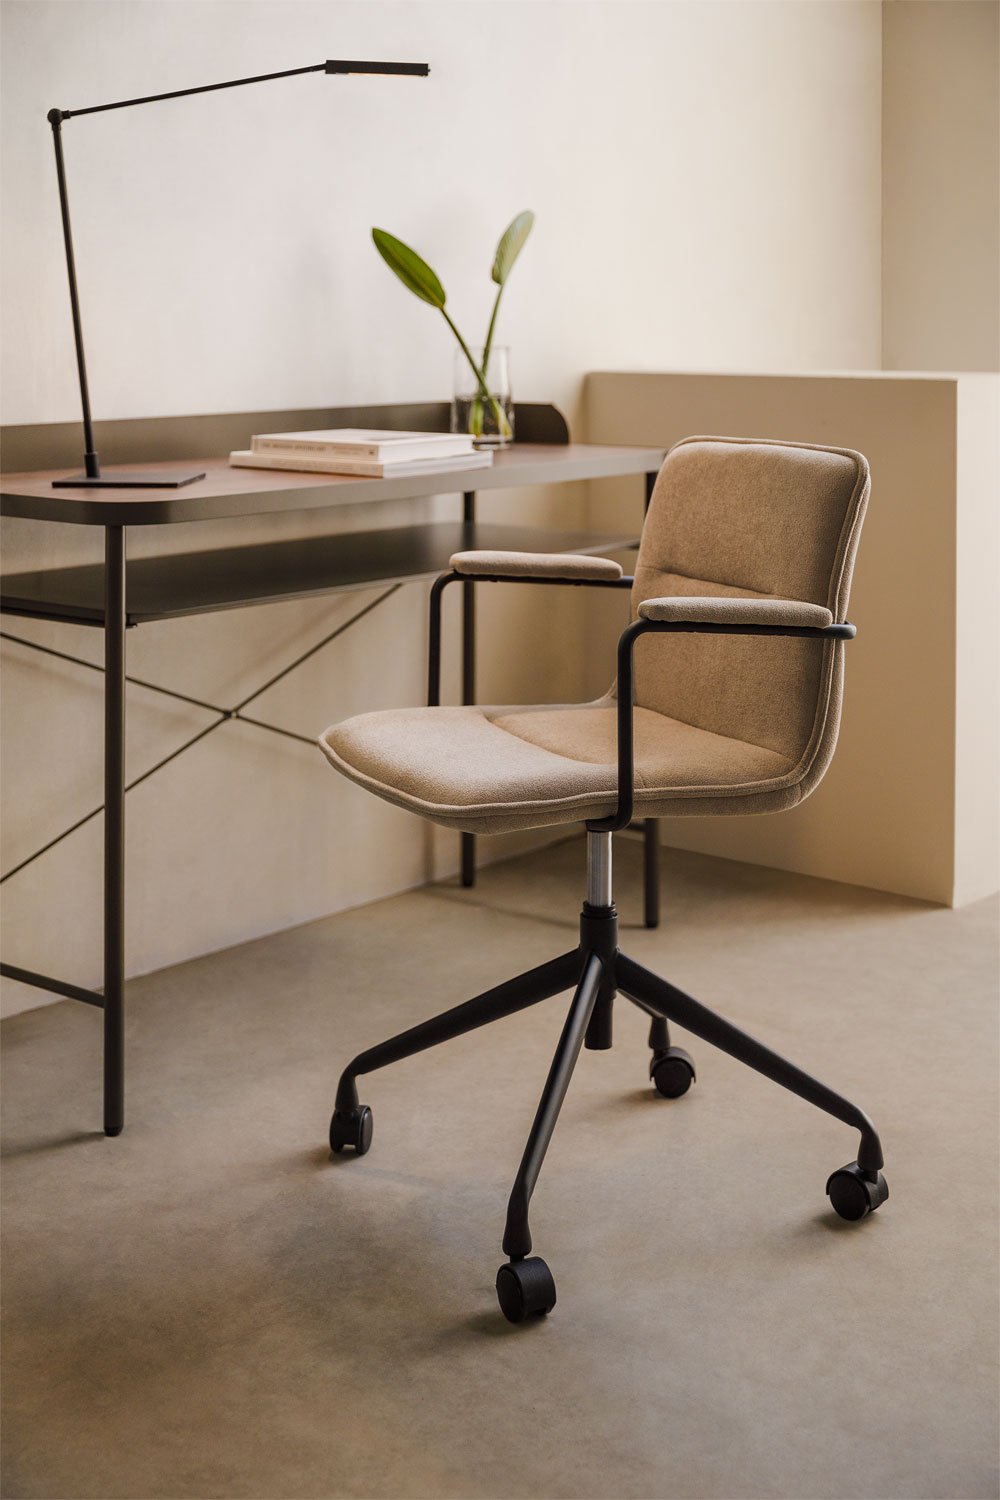 Seifert Desk Chair with Wheels and Armrests, gallery image 1